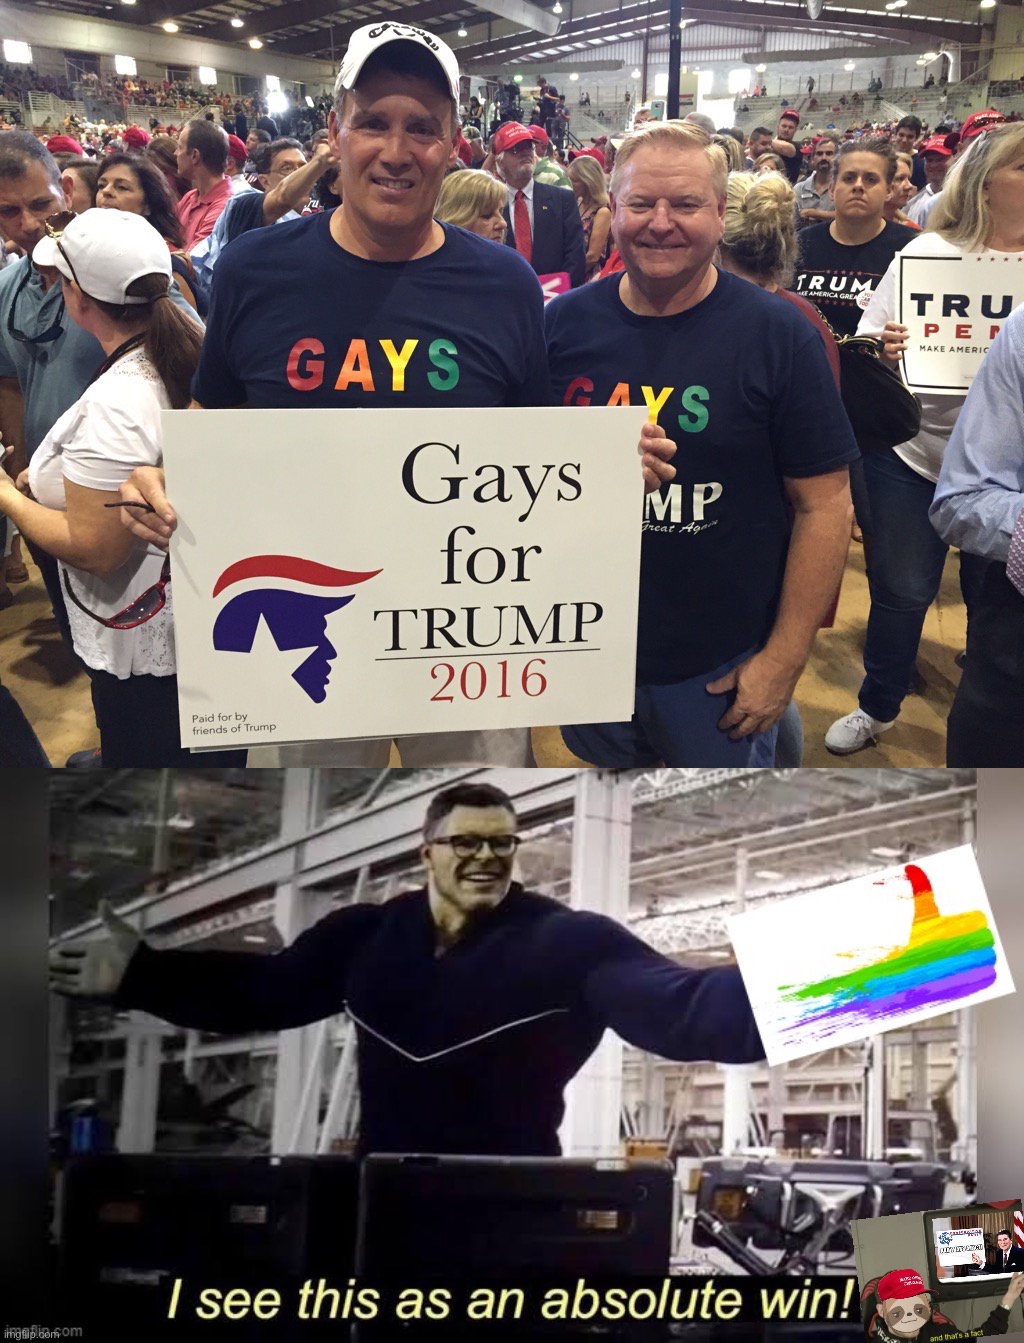 Our Party was WRONG on this. We will never apologize for supporting LGBTQ! #NewCP | image tagged in trump gays,hulk i see this as an absolute win lgbtq friendly,lgbtq,lgbt,gay,conservative party | made w/ Imgflip meme maker